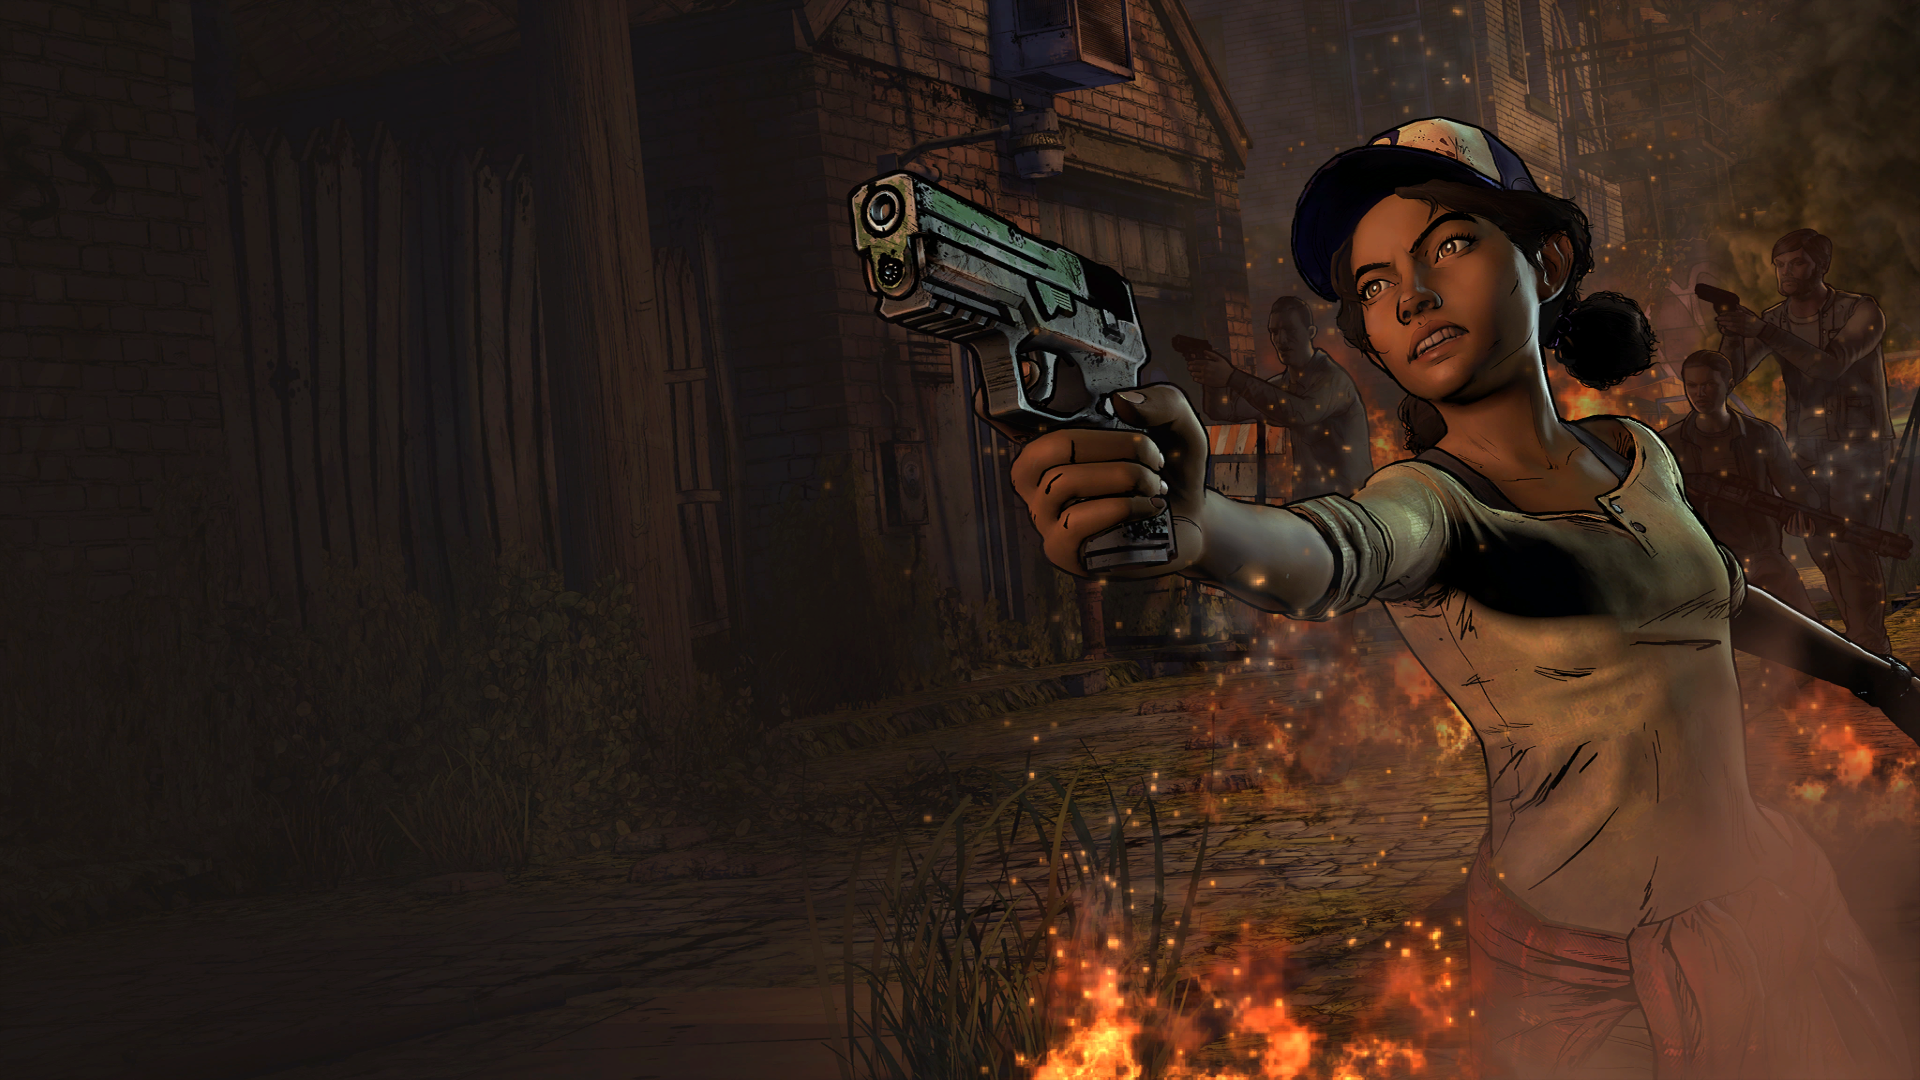 is clementine in the new walking dead game